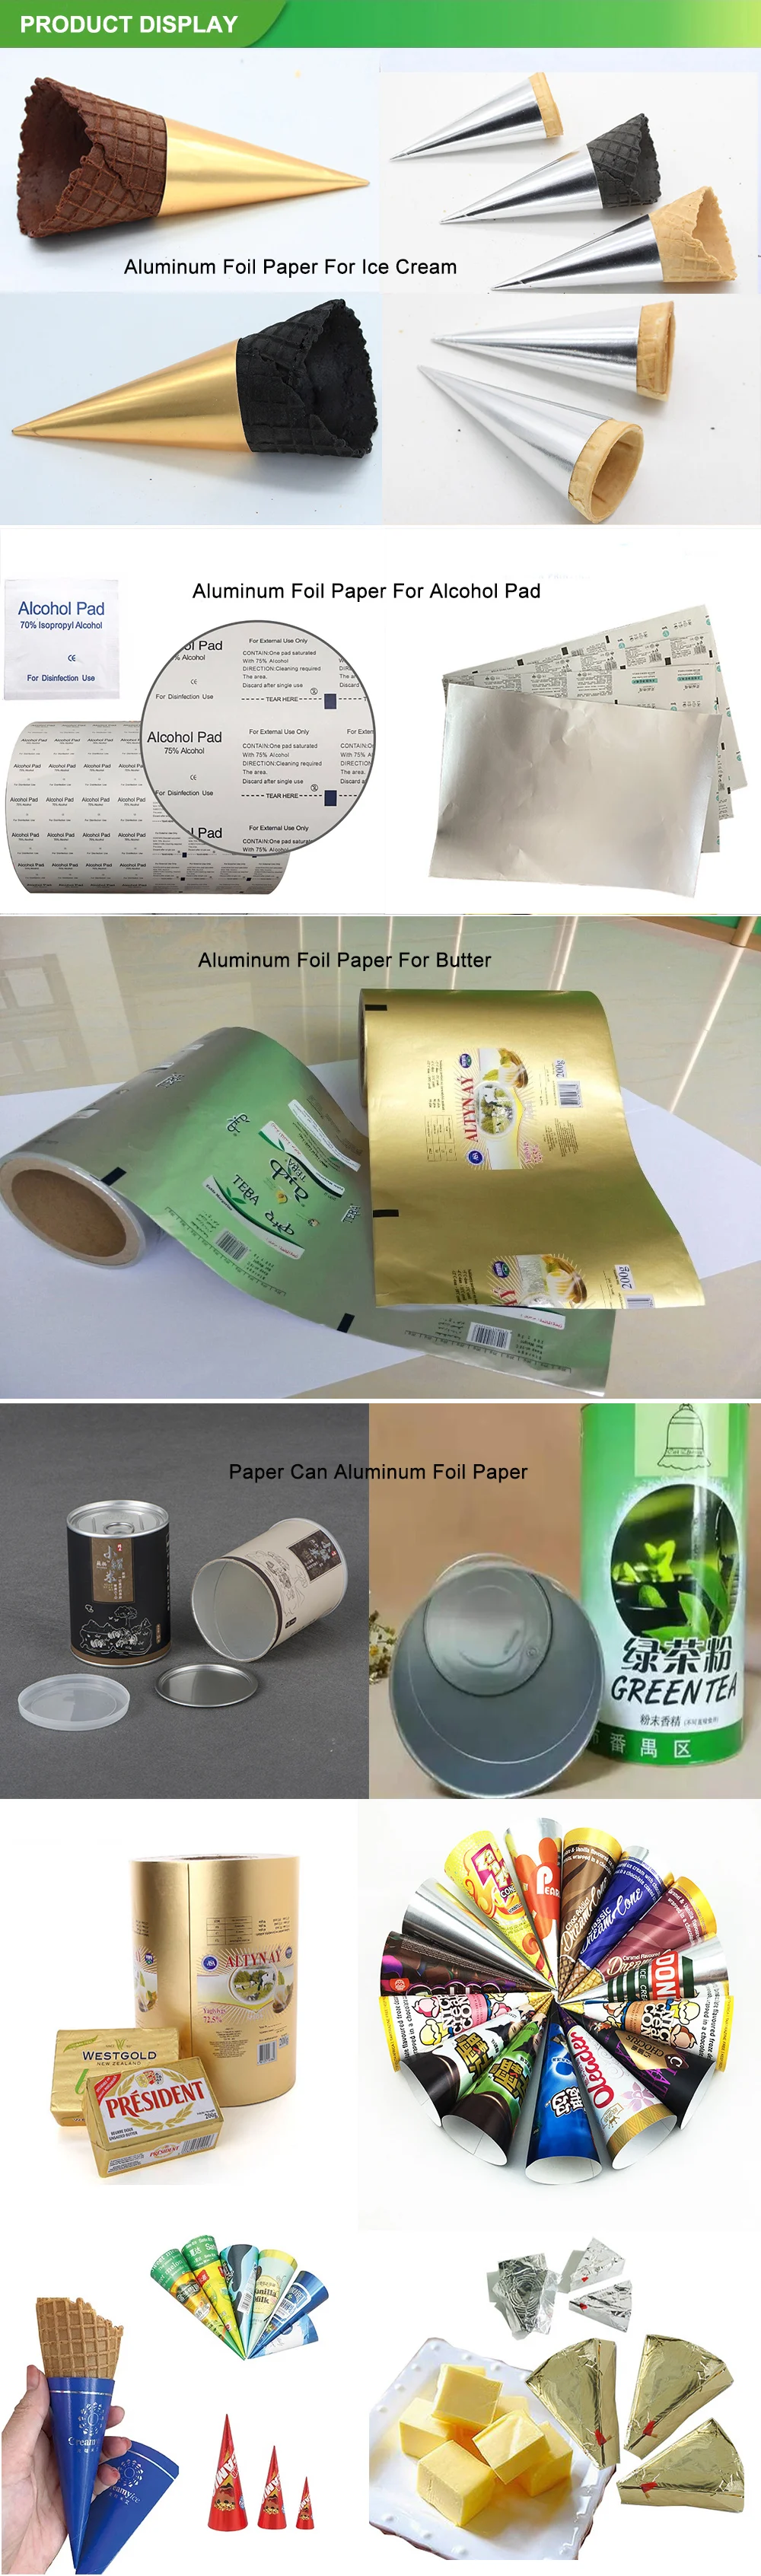 Wrapping Chocolate Wrap Aluminum Foil For Food Jumbo Roll